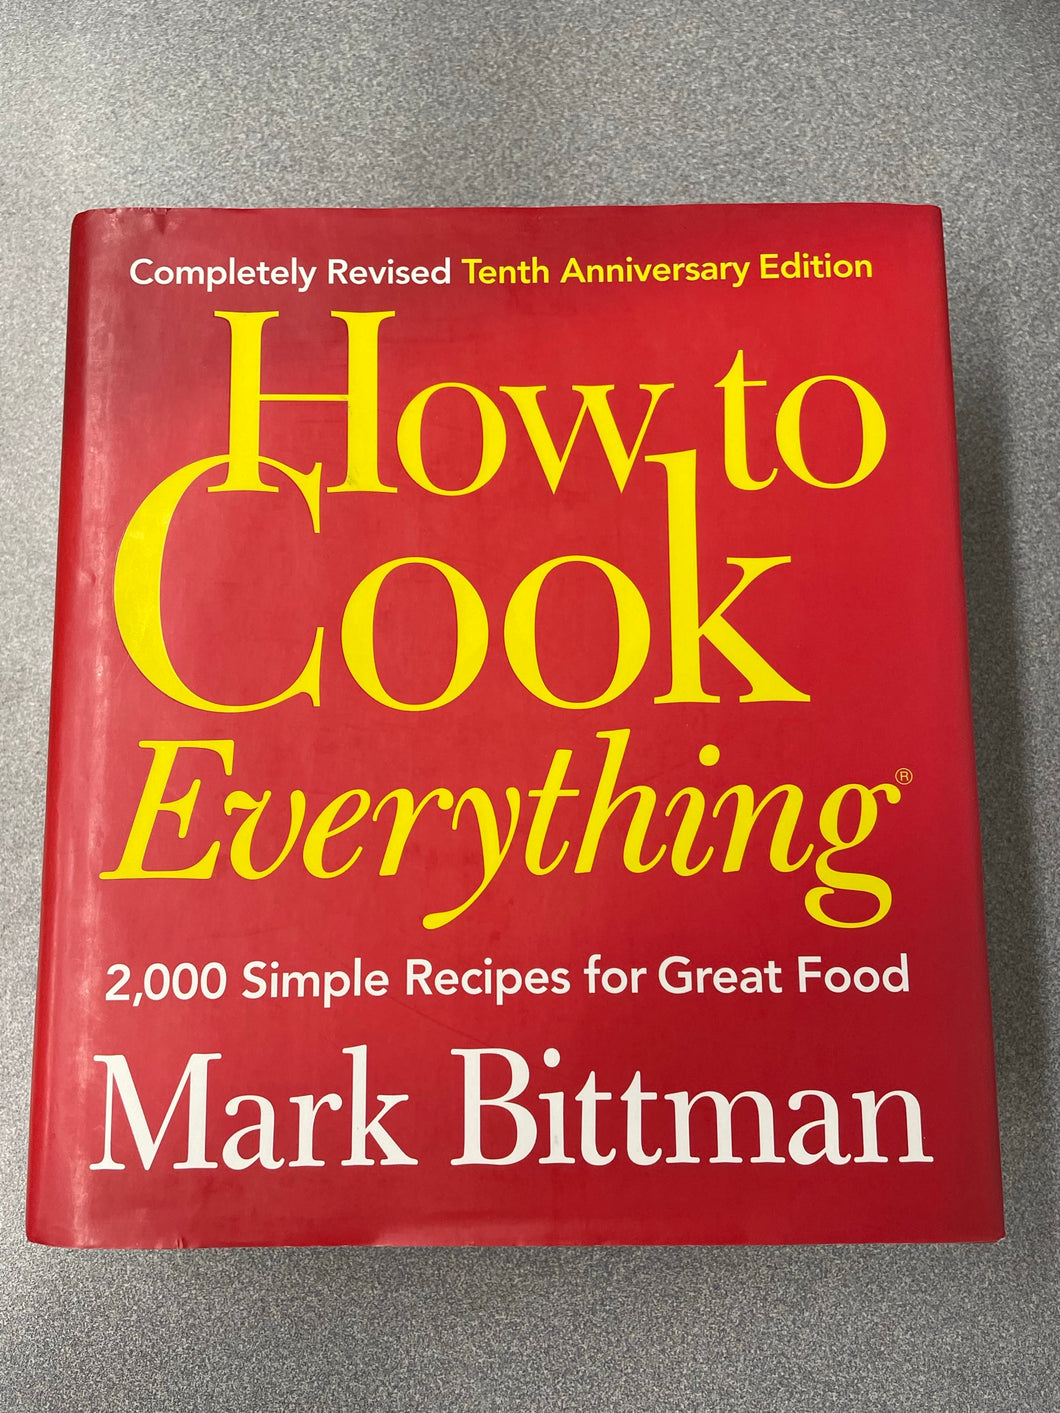 How to Cook Everything: 2000 Simple Recipes for Great Food, Bittman, Mark [2008] CO 4/23